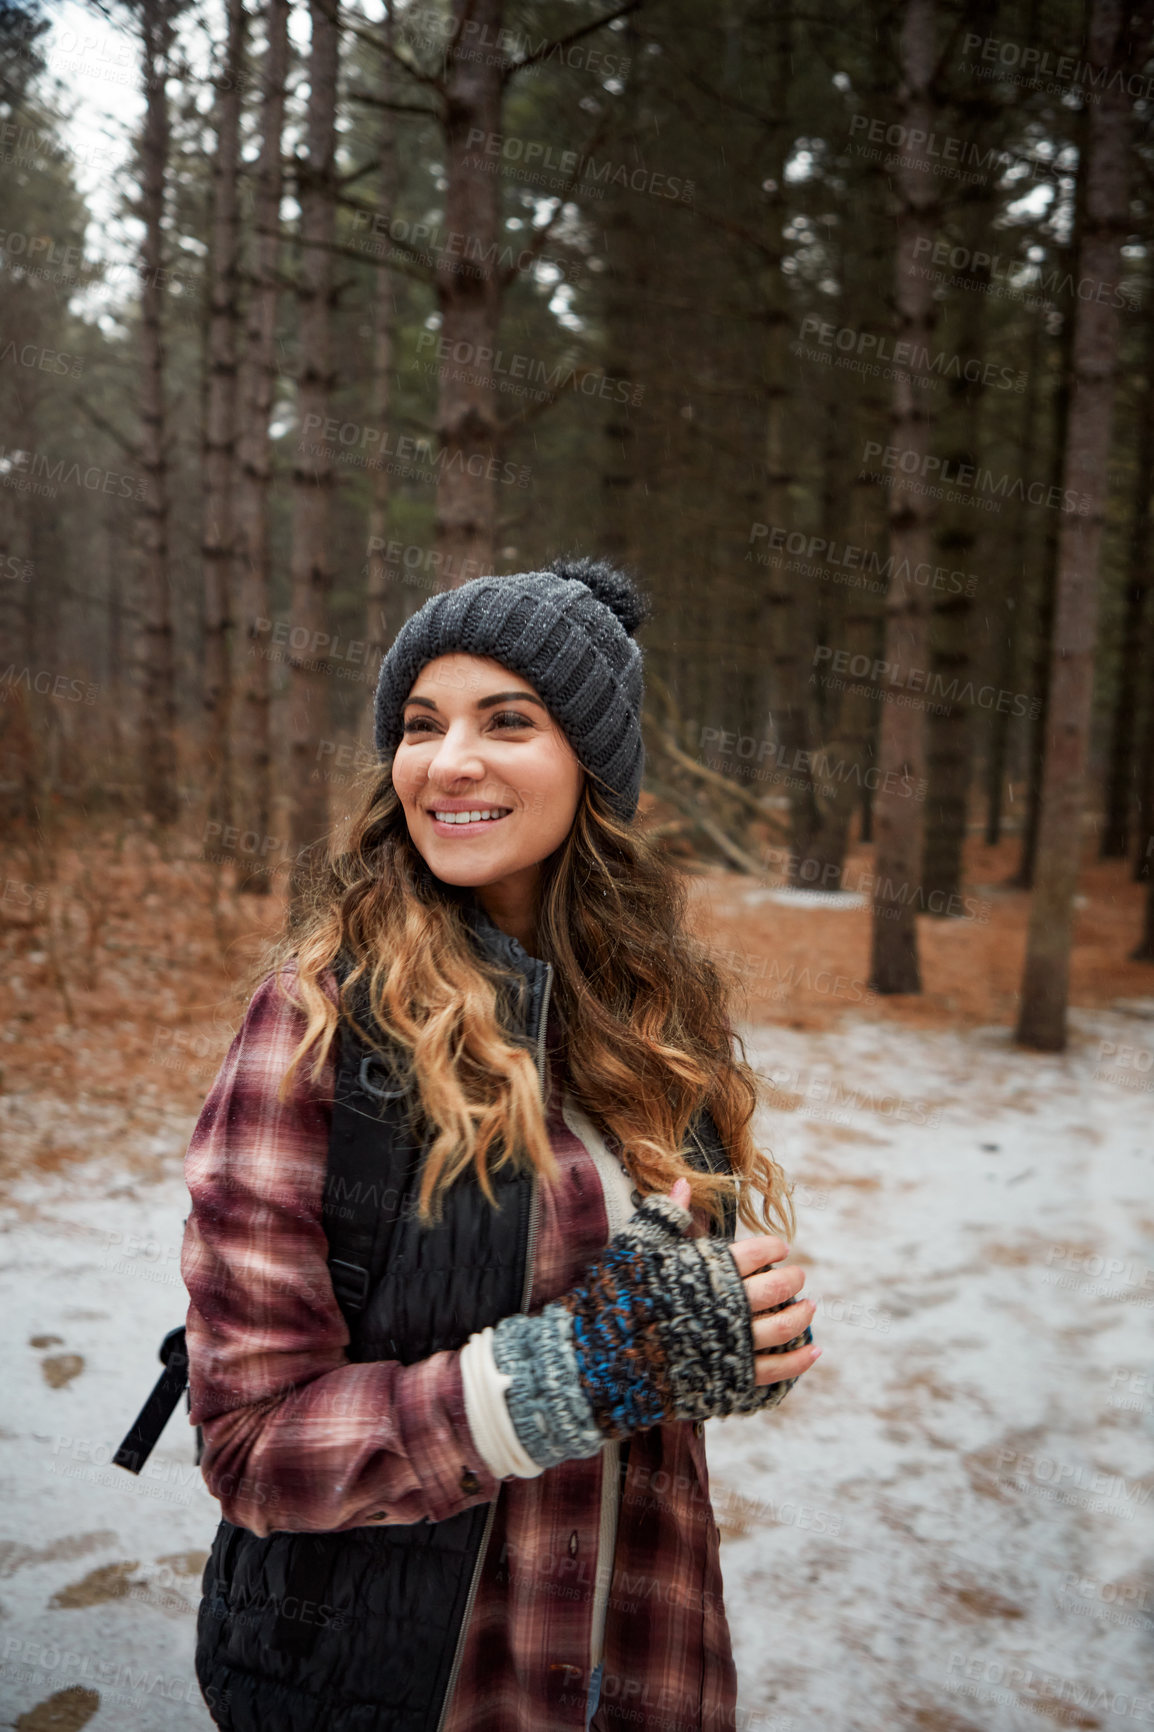 Buy stock photo Shot of a young woman hiking in the wilderness during winter